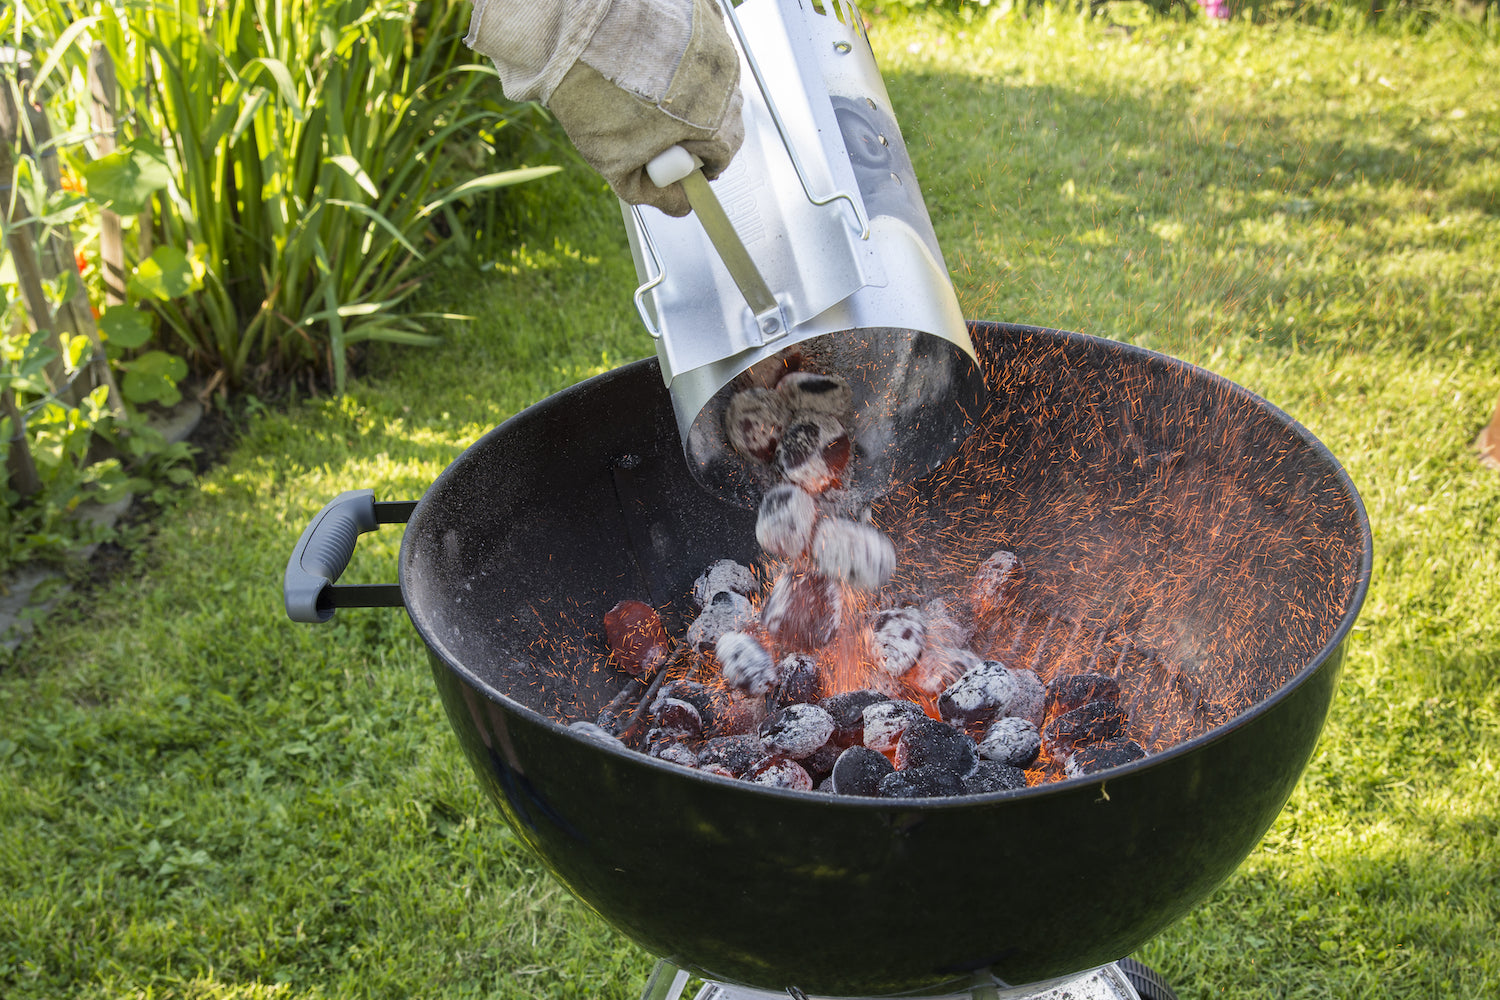 How to light a charcoal grill: simple methods to follow